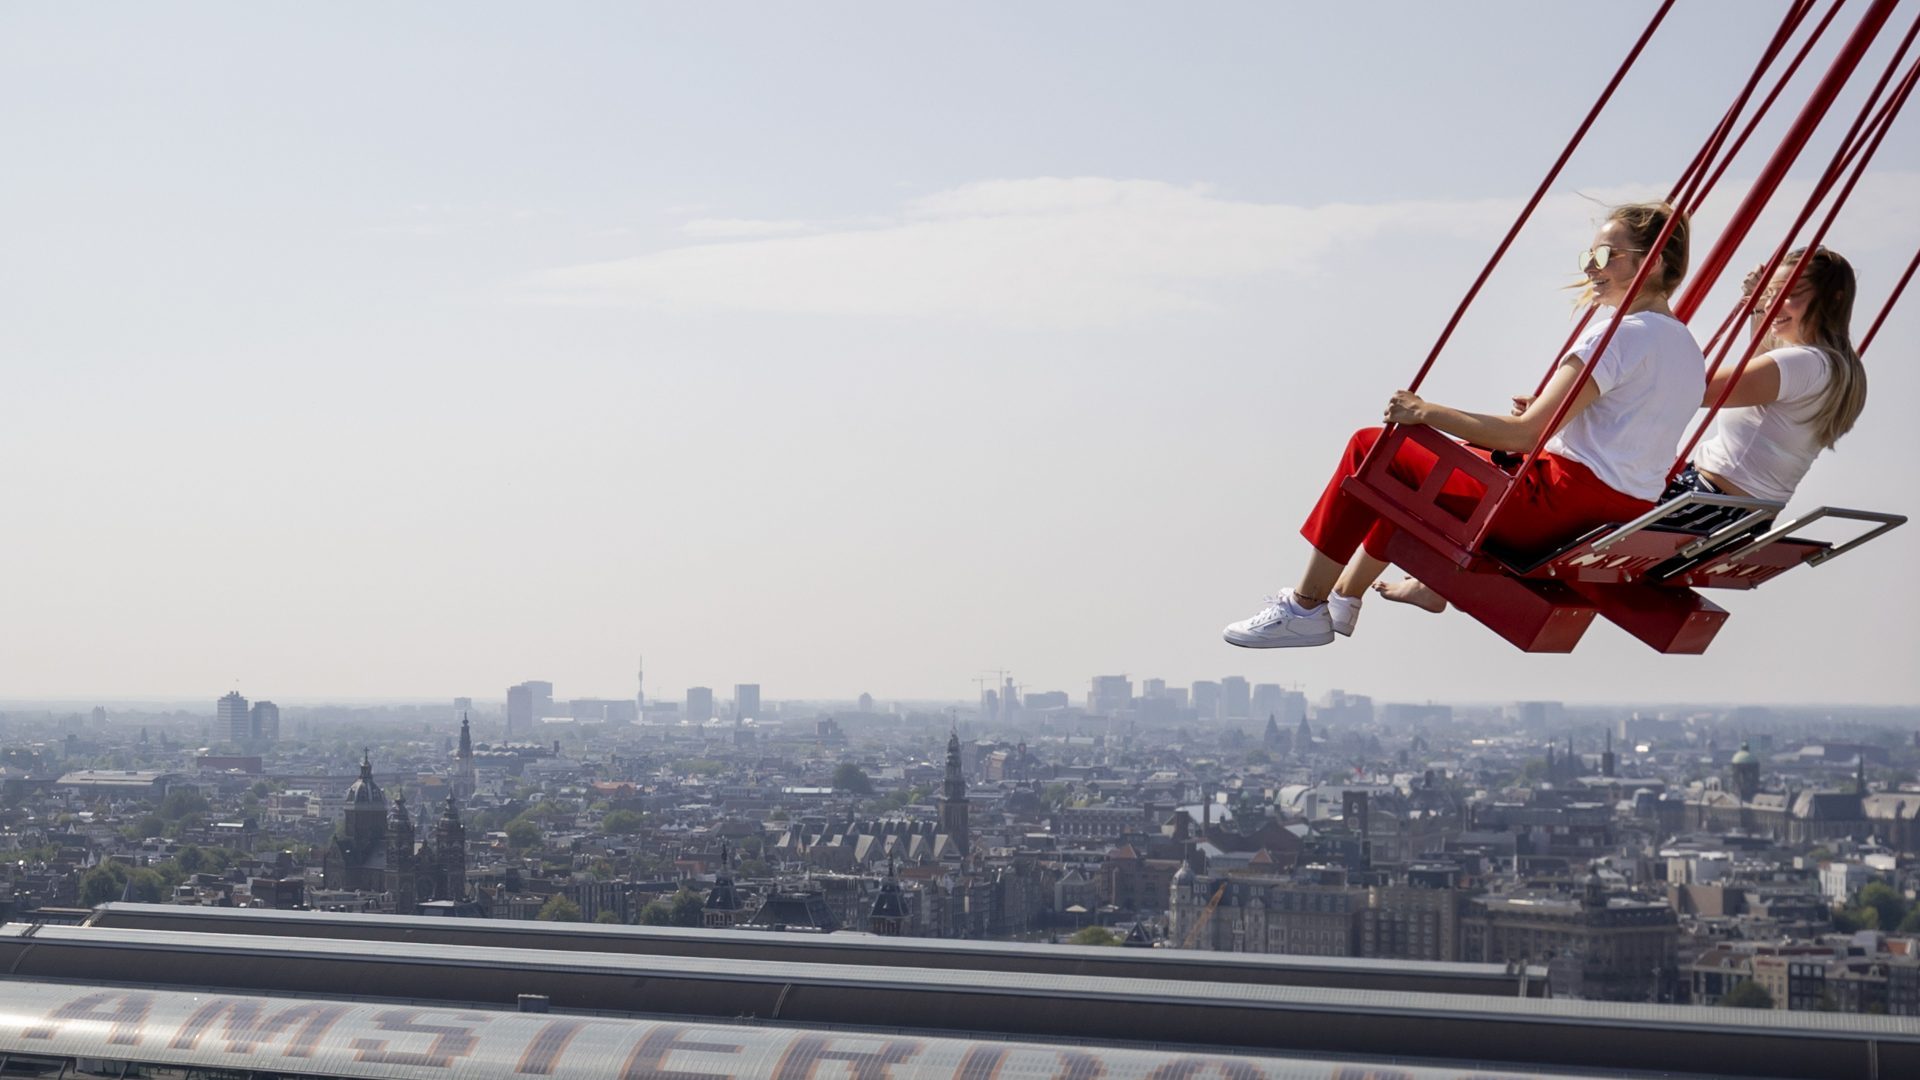 The swings at Amsterdam’s 100m high A’dam Tower offer a panoramic, if scary, view of 
the city and booming Noord. Photo: Robin Van Lonkhuijsen/AFP